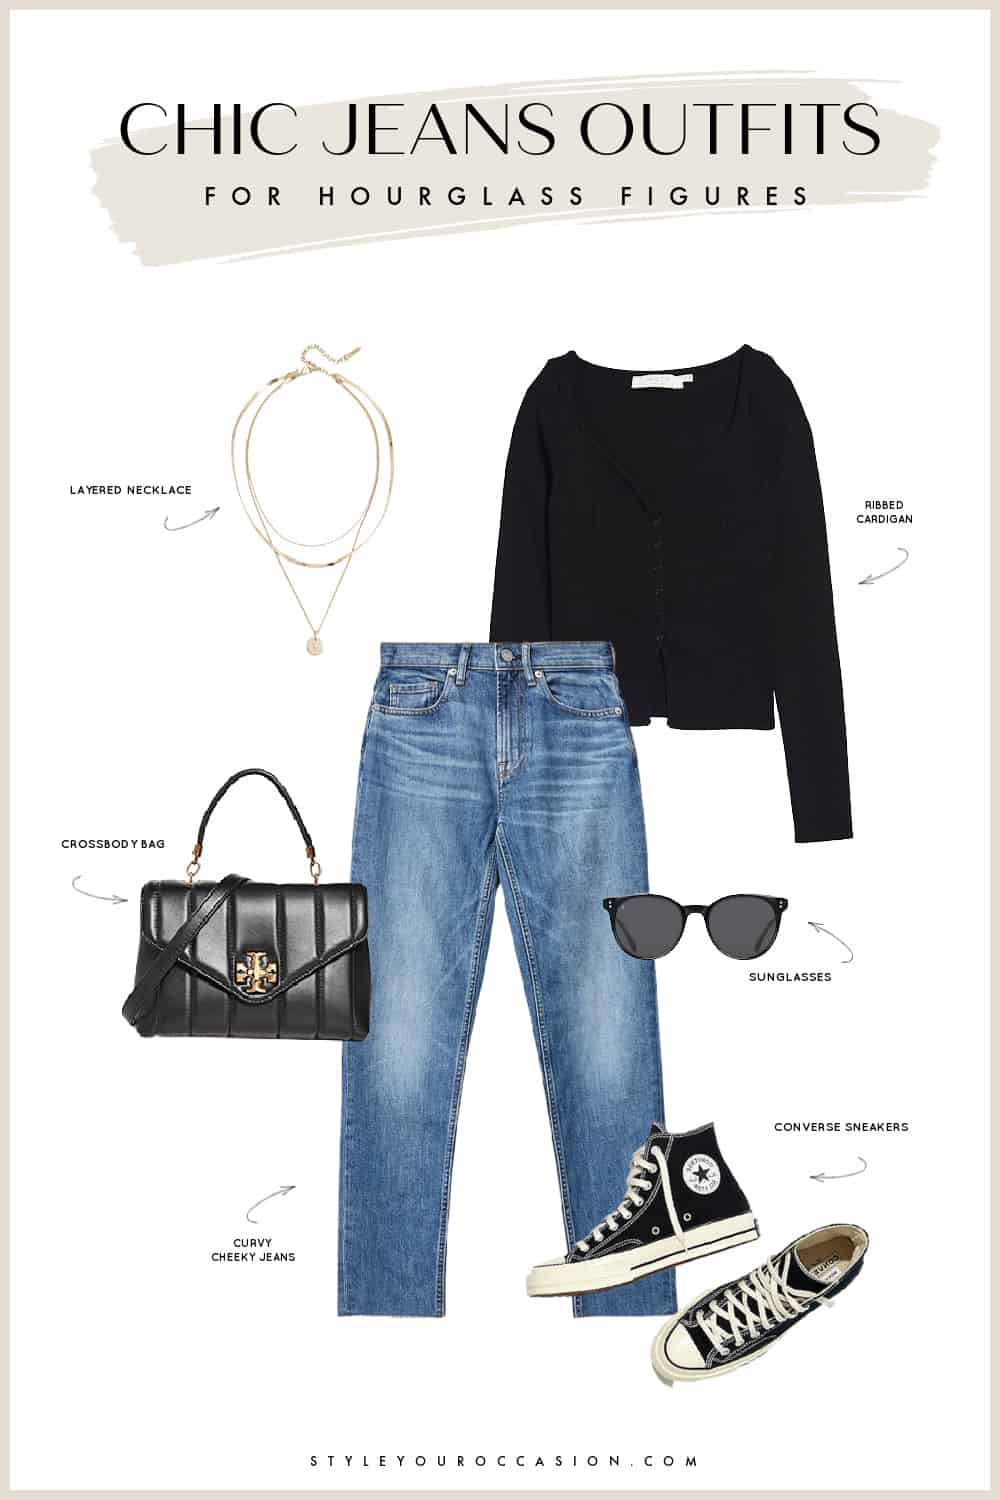 Outfit collage of best jeans to wear for an hourglass figure with high-rise blue jeans, a black ribbed cardigan, high top sneakers, and a black purse